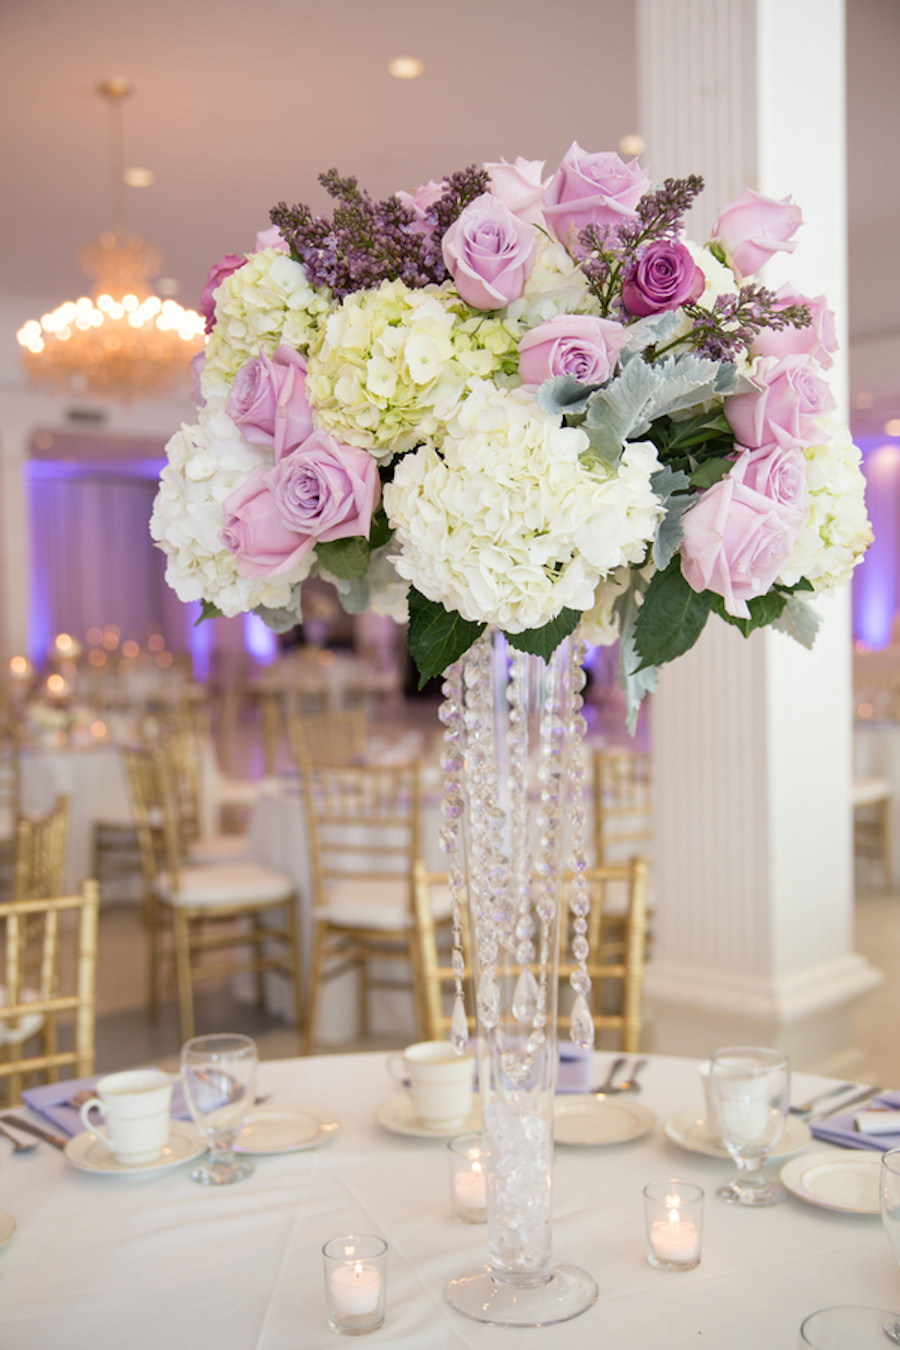 Elegant, Romantic Purple, Ivory, Lilac and White Rose and Hydrangea Floral Centerpieces with Dripping Rhinestone Crystals at Wedding Reception | Clearwater Wedding Planner Blush by Brandee Gaar